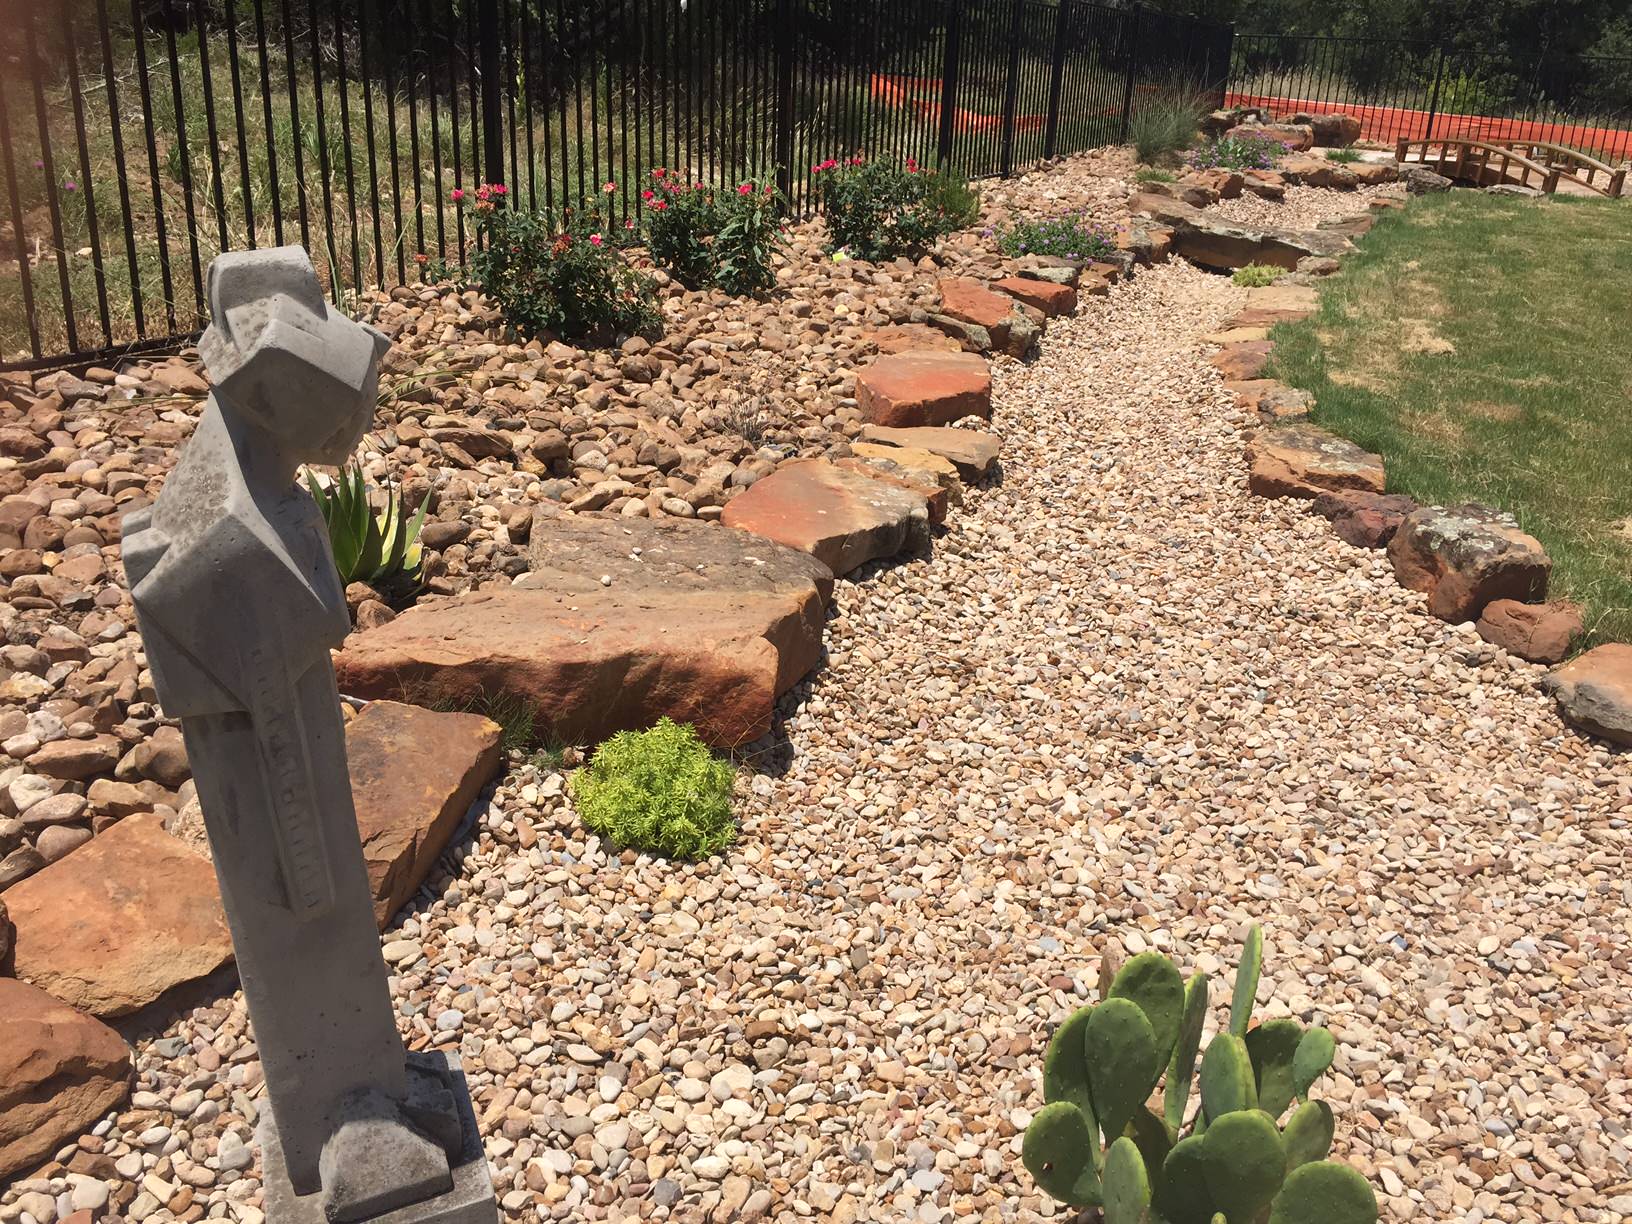 Xeriscape w/ dry creek bed for drainage